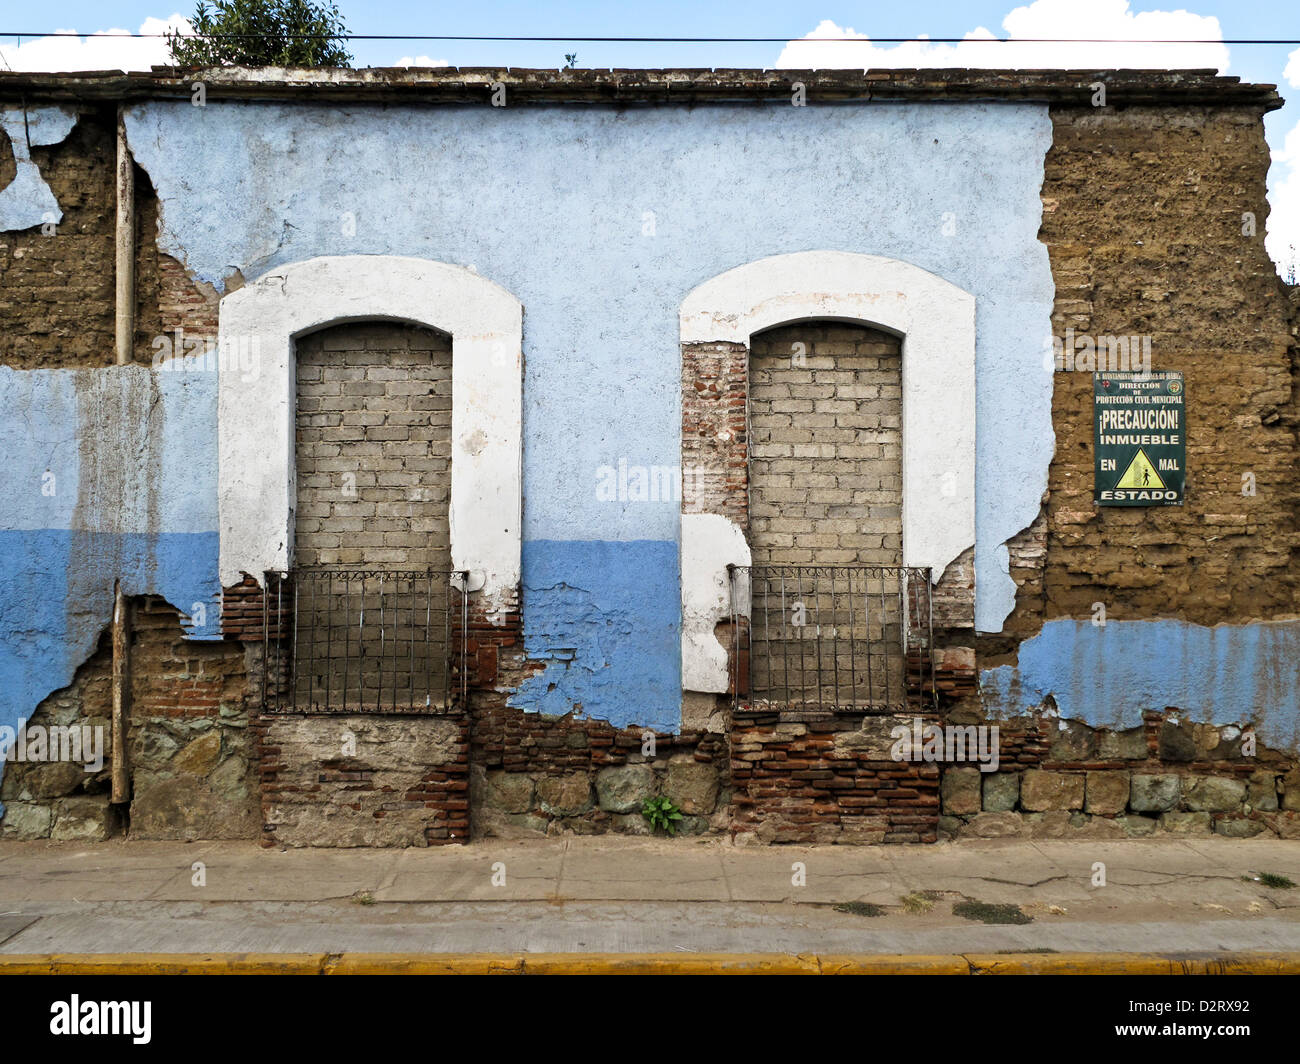 street facade abandoned adobe house with crumbling blue plaster & posted sign warning of building in bad condition Oaxaca Mexico Stock Photo